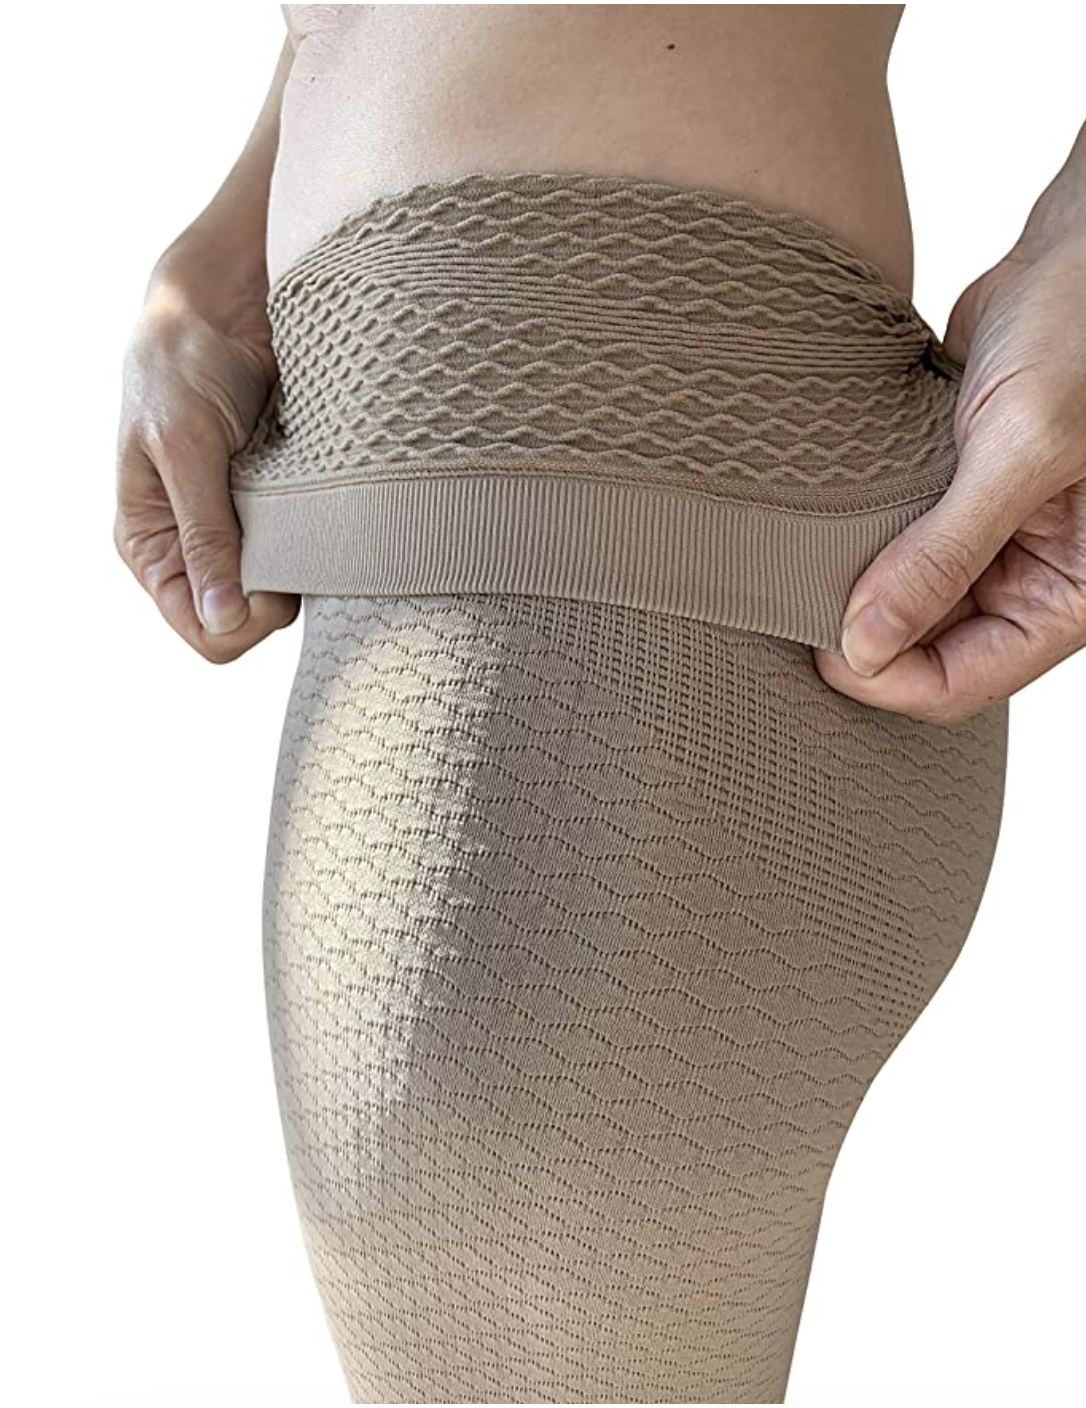 Compression stockings for lymphoedema and lipoedema